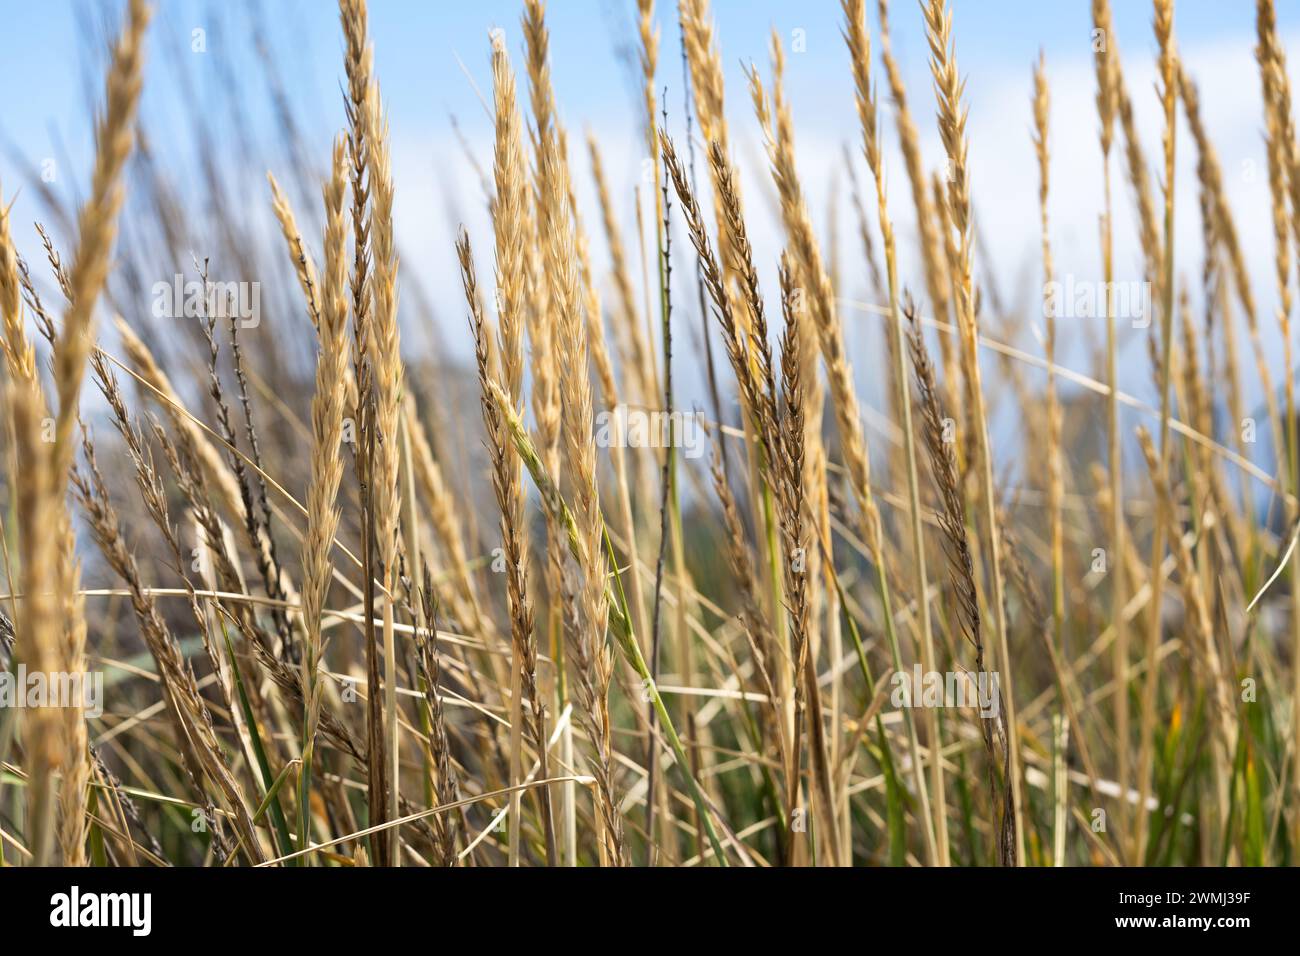 dry grass spikes close up wallpaper background Stock Photo